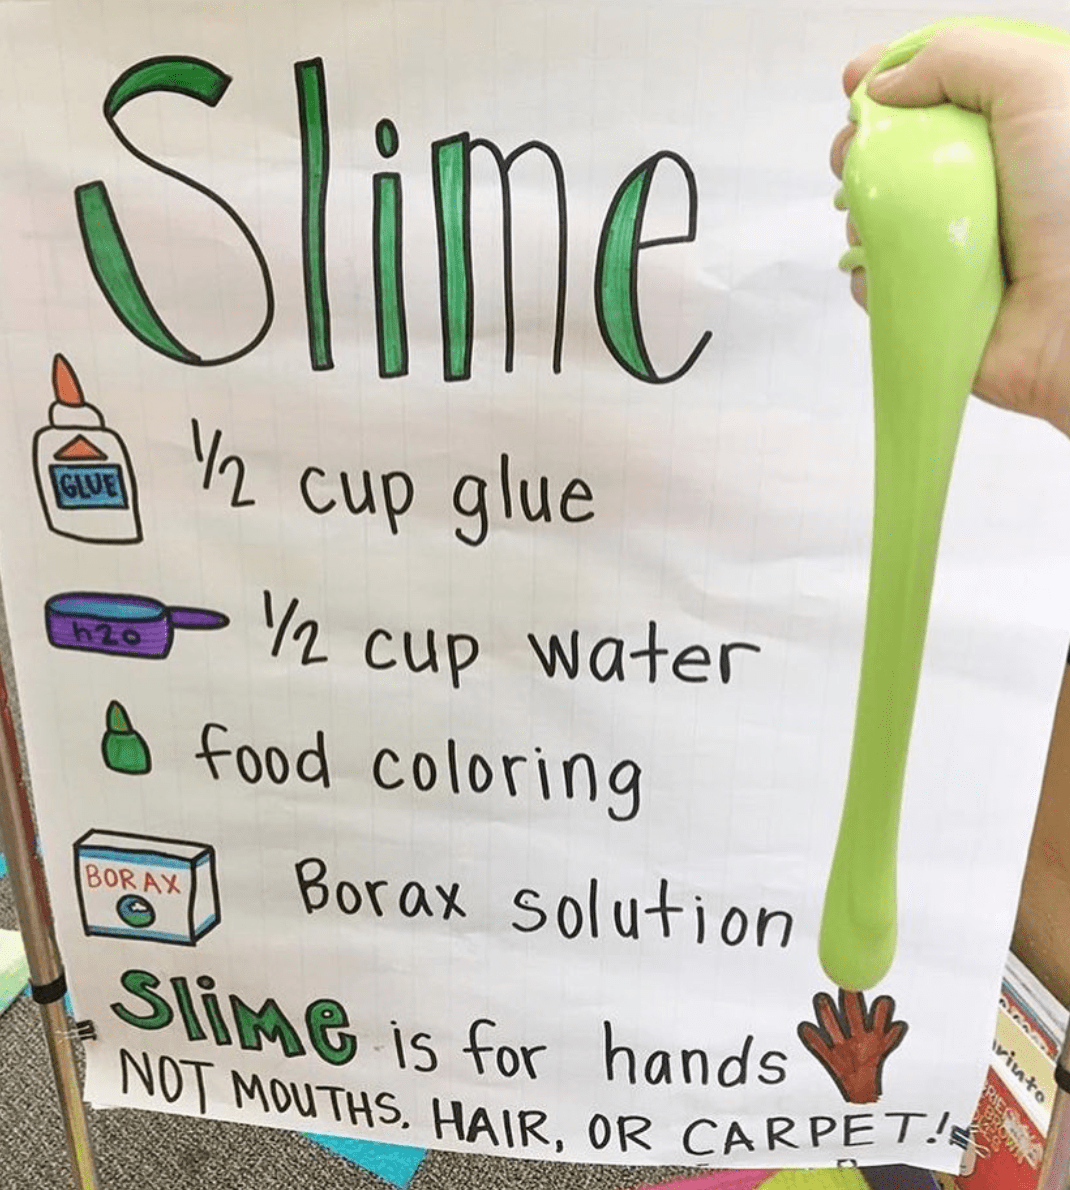 Super EASY Slime Recipe With Just 2 Ingredients! - STEM Education